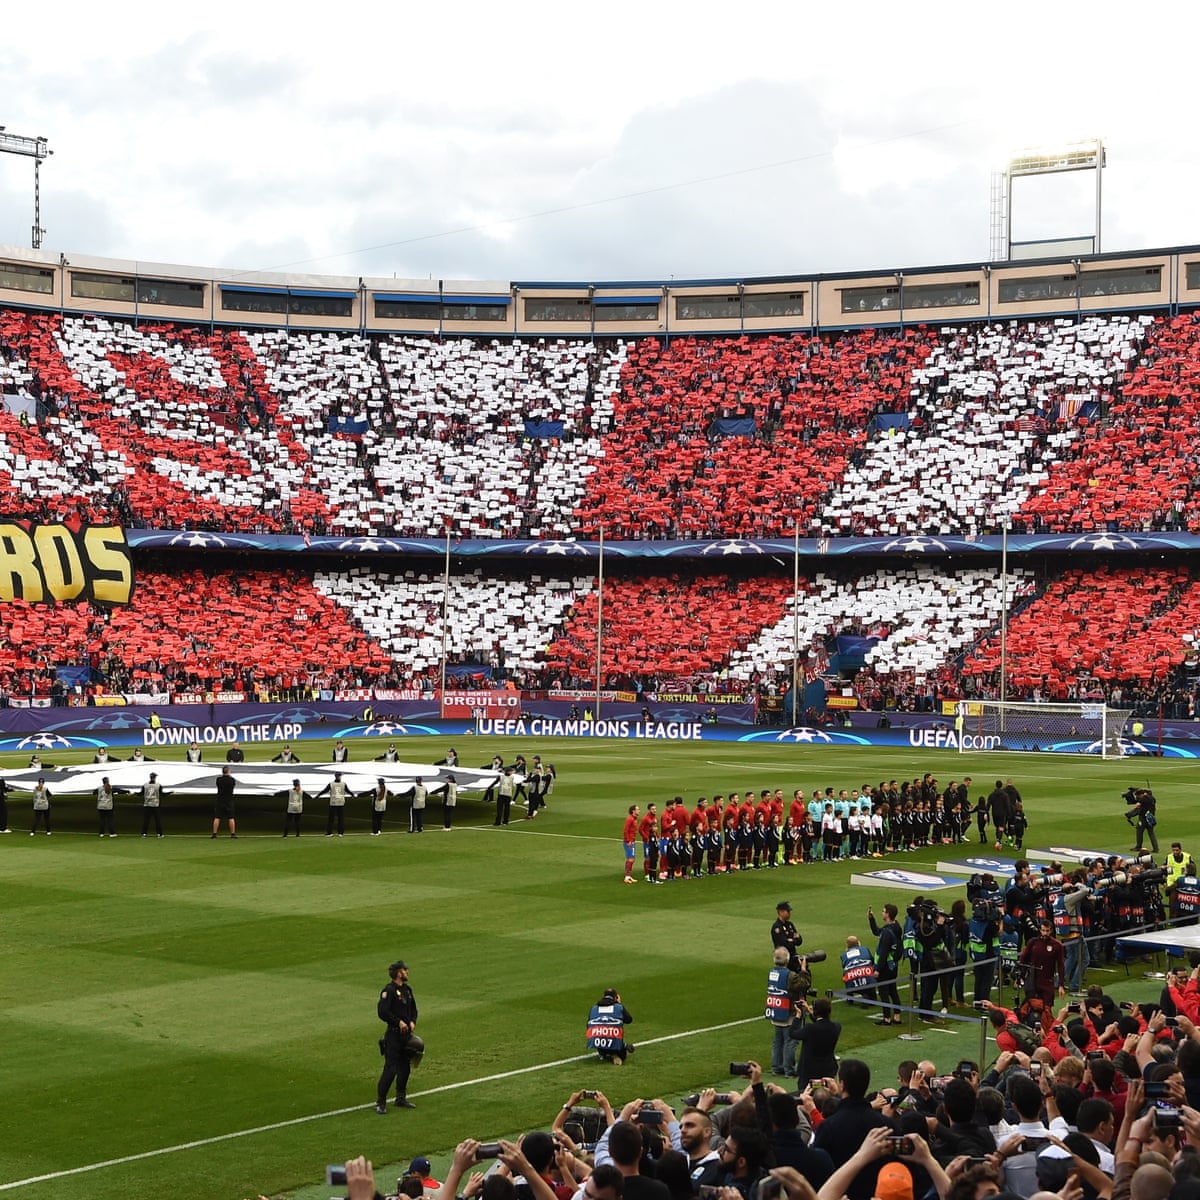 Atlético Madrid's preseason ends with hot-tempered loss to Feyenoord - Into  the Calderon